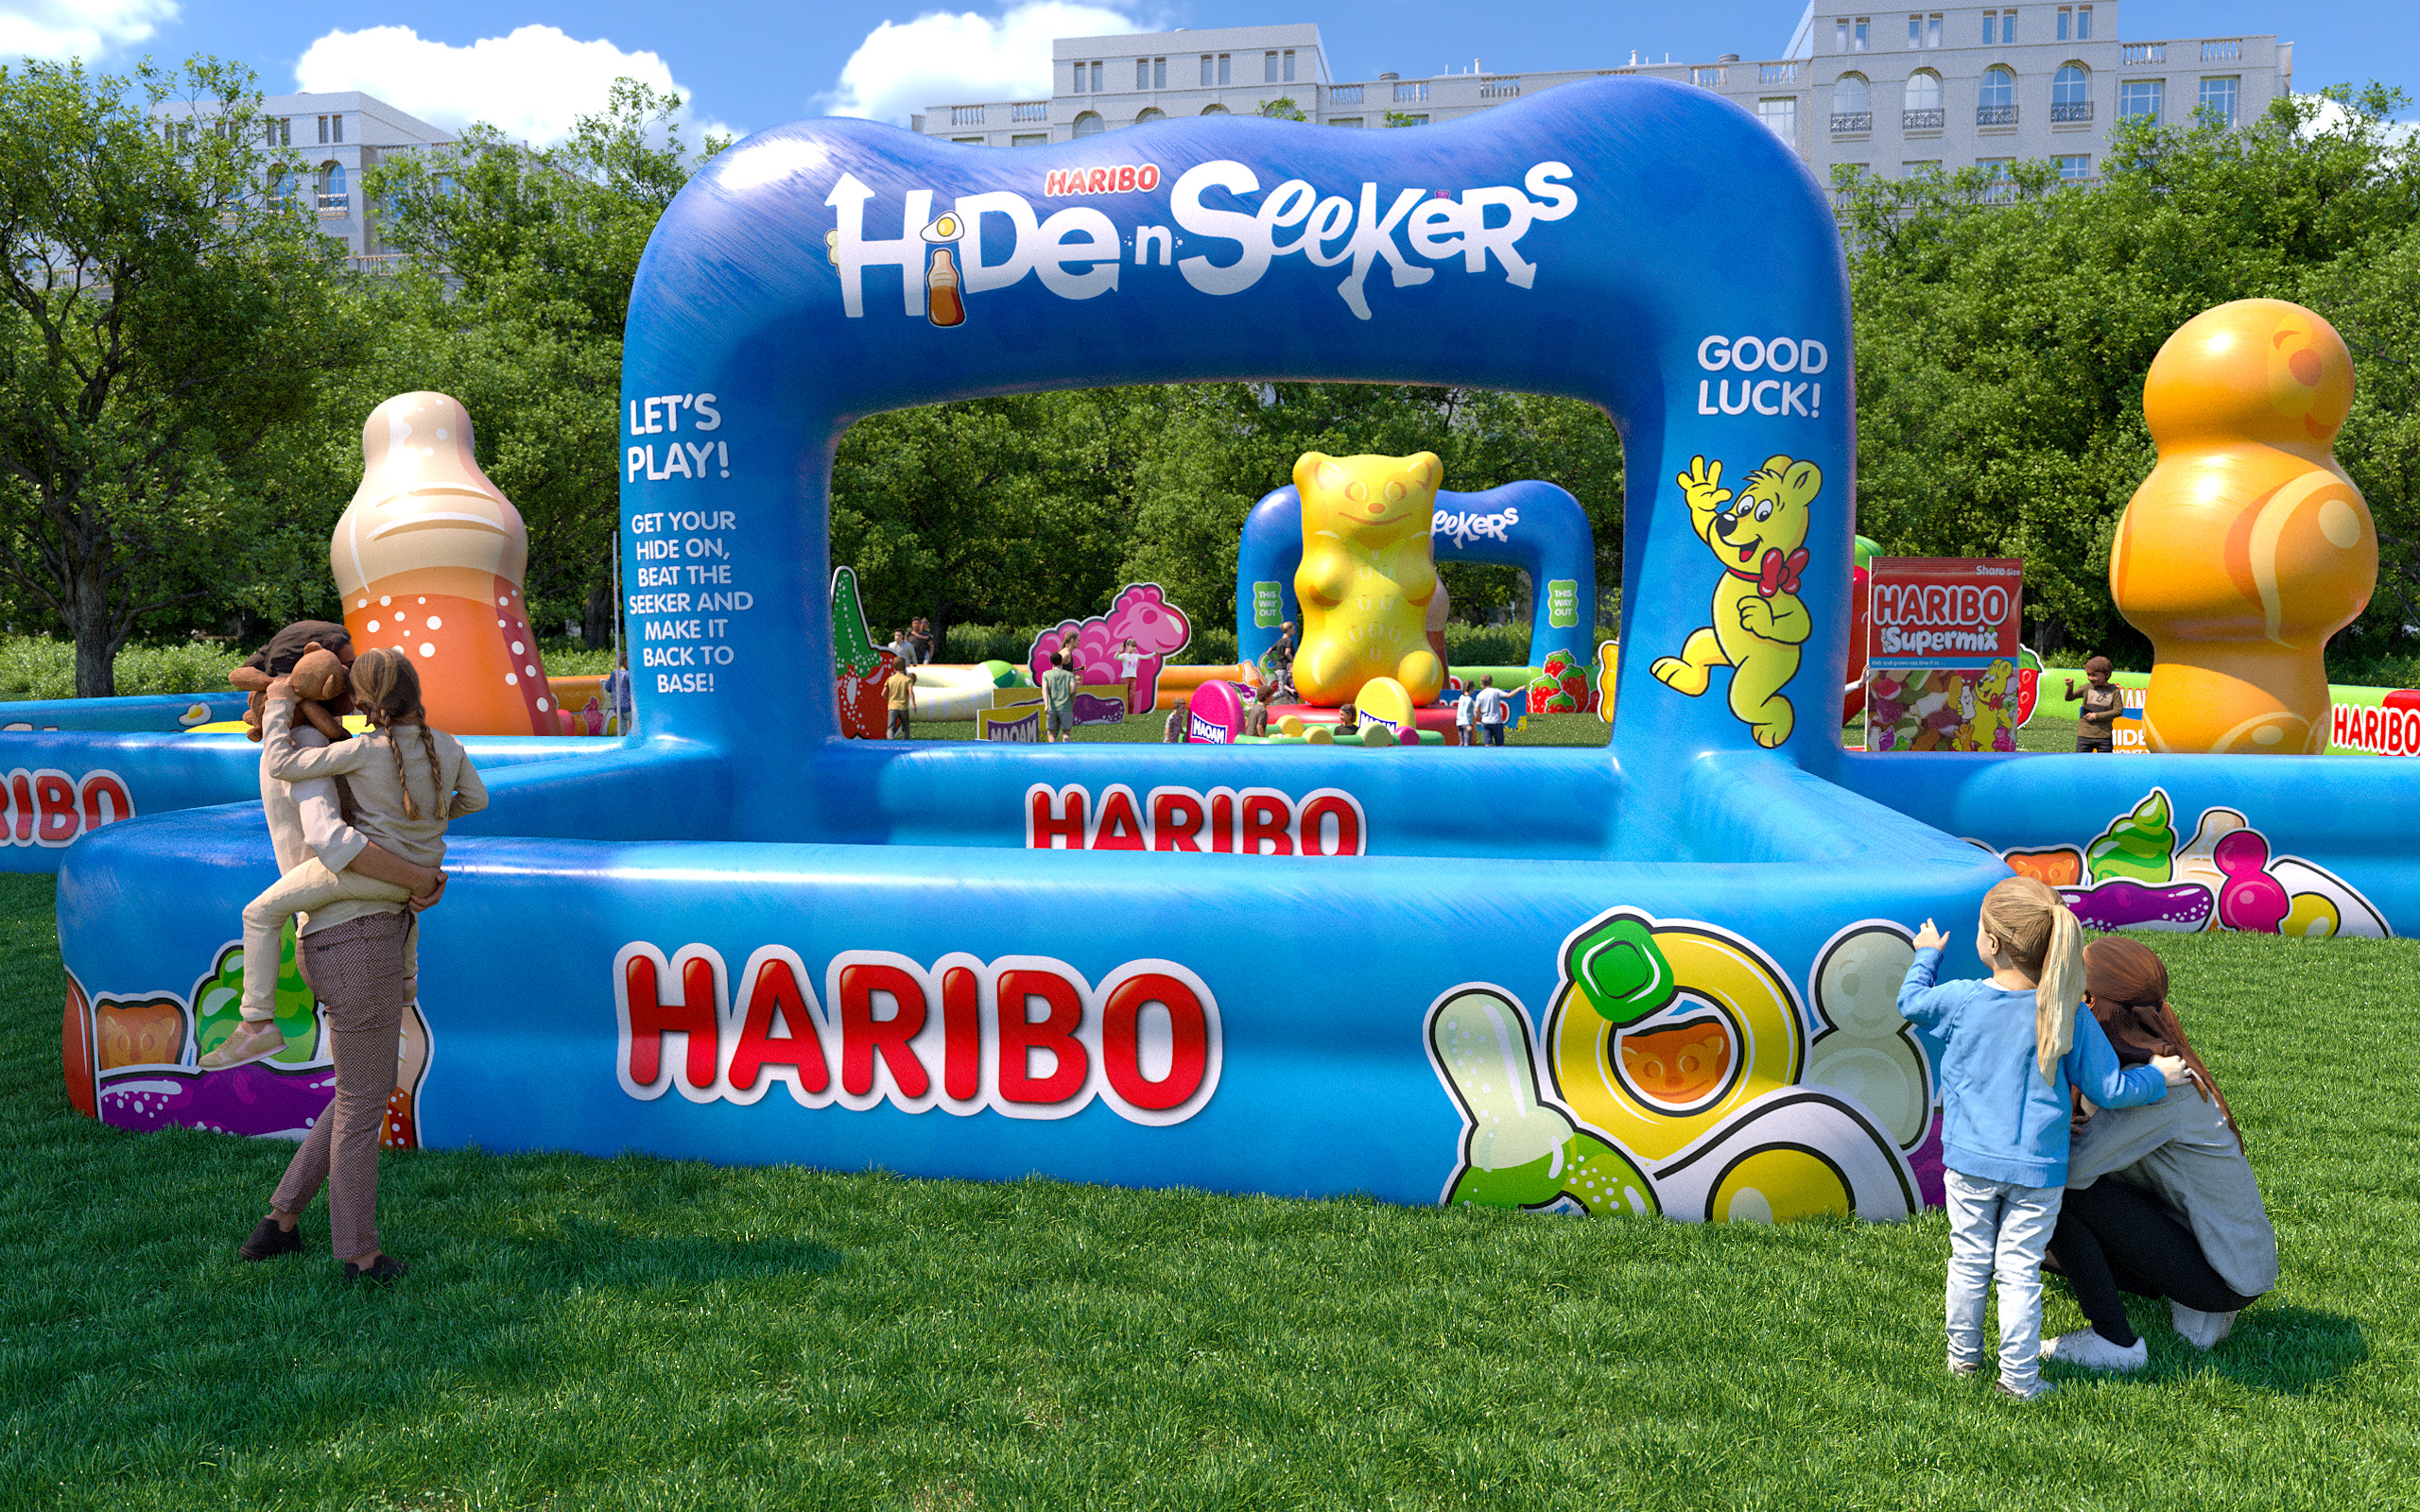 HARIBO launches Hide ‘N’ Seekers to bring summer to UK families